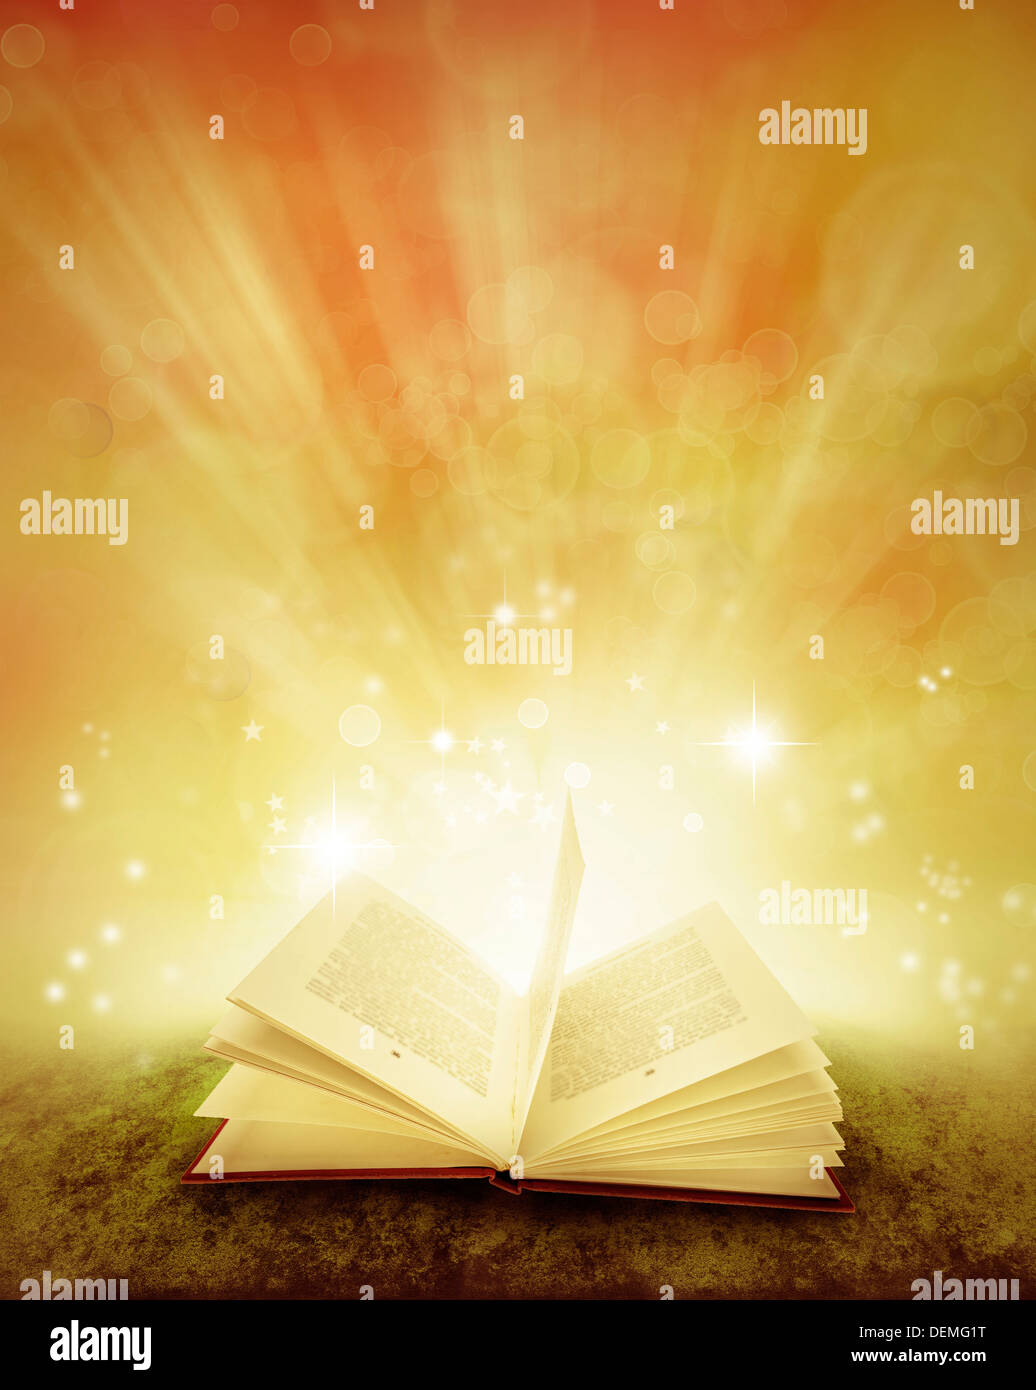 Open book and magical background Stock Photo